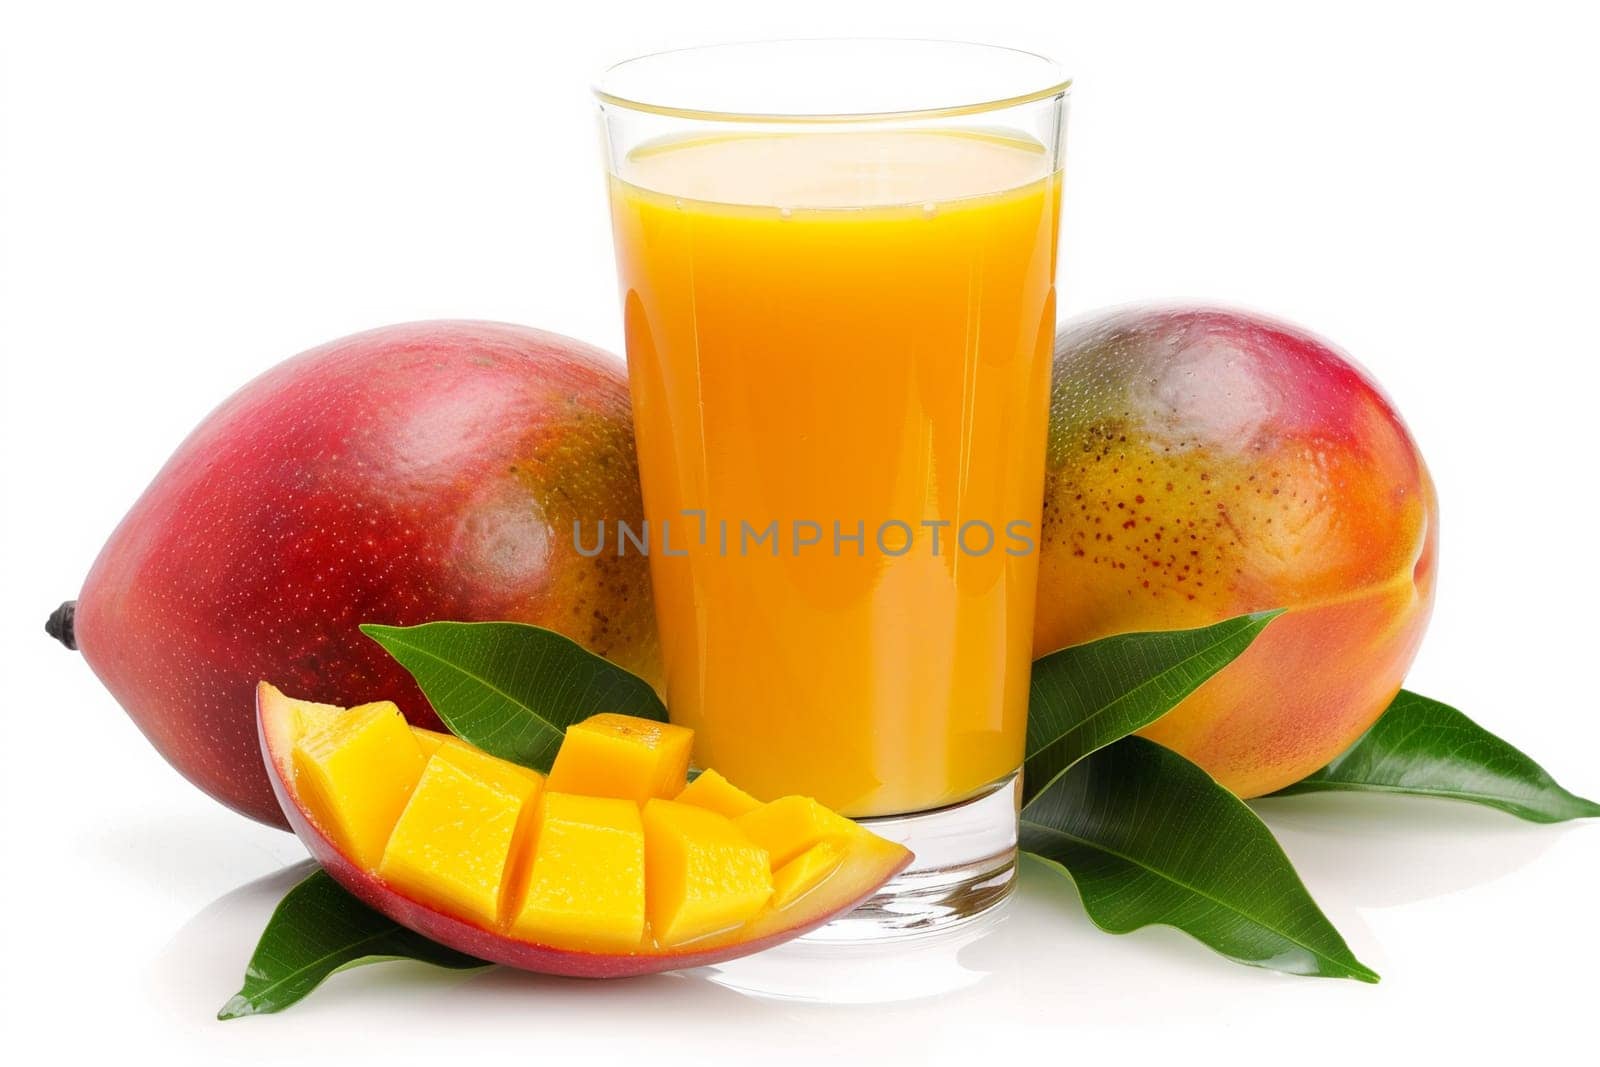 Ripe whole mangoes with diced fruit pieces and fresh juice in a transparent glass, garnished with green leaves on a white background.